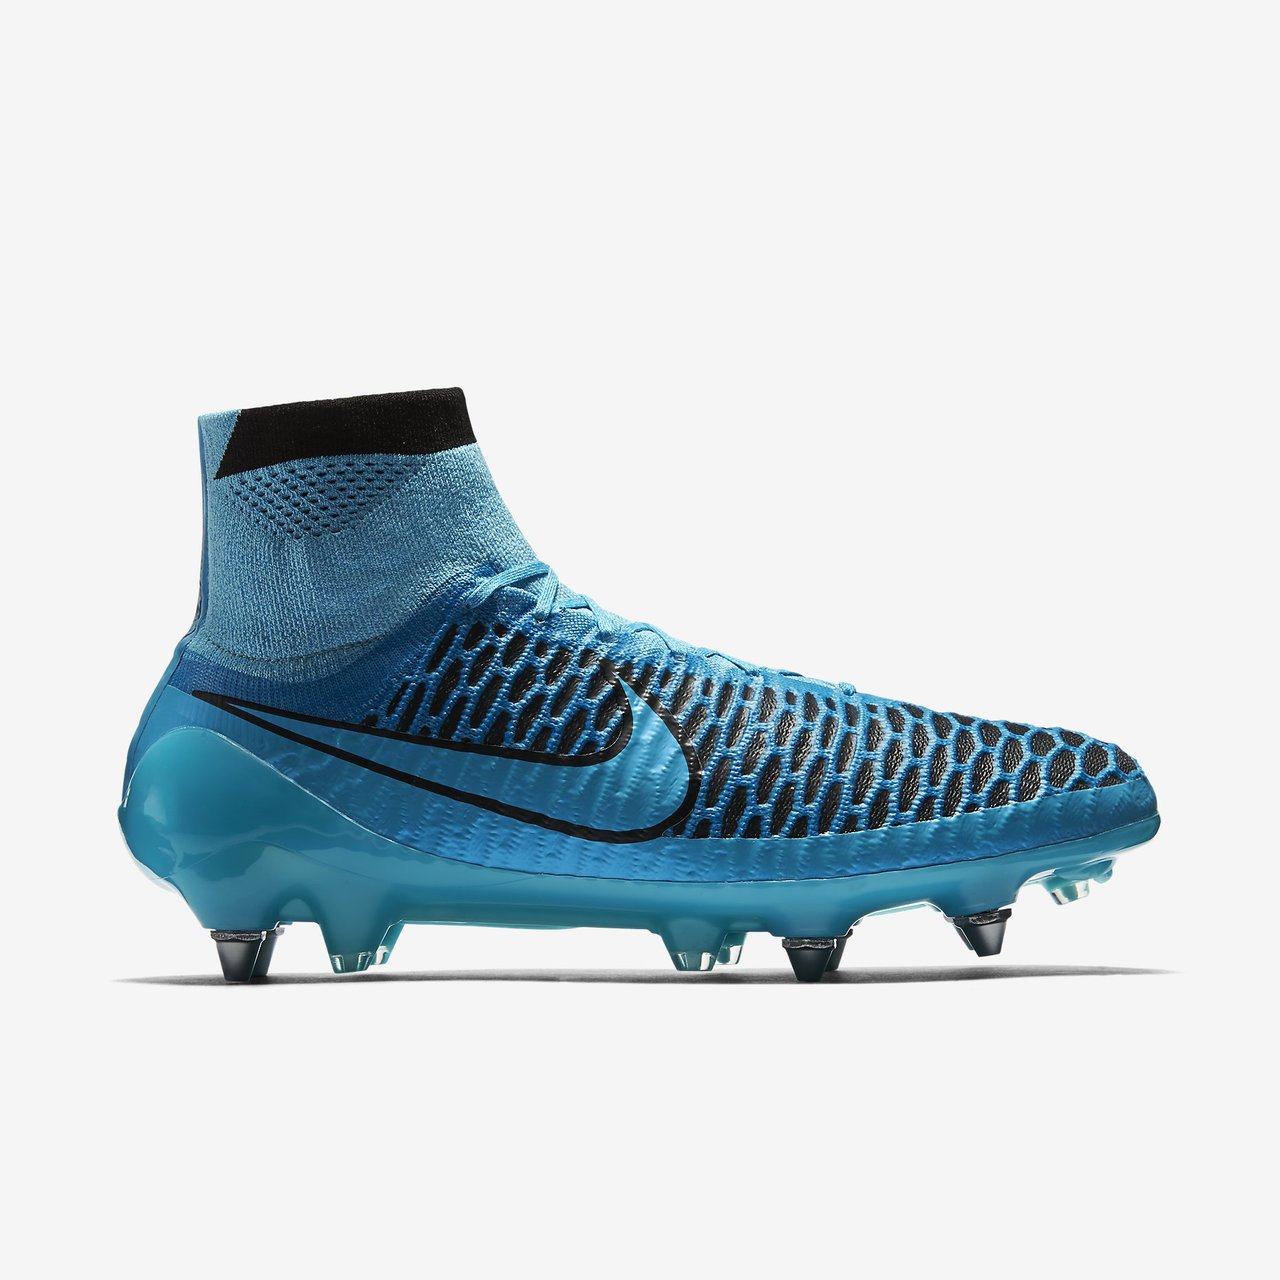 White Nike MagistaX Proximo II 2016 Boots Released Footy